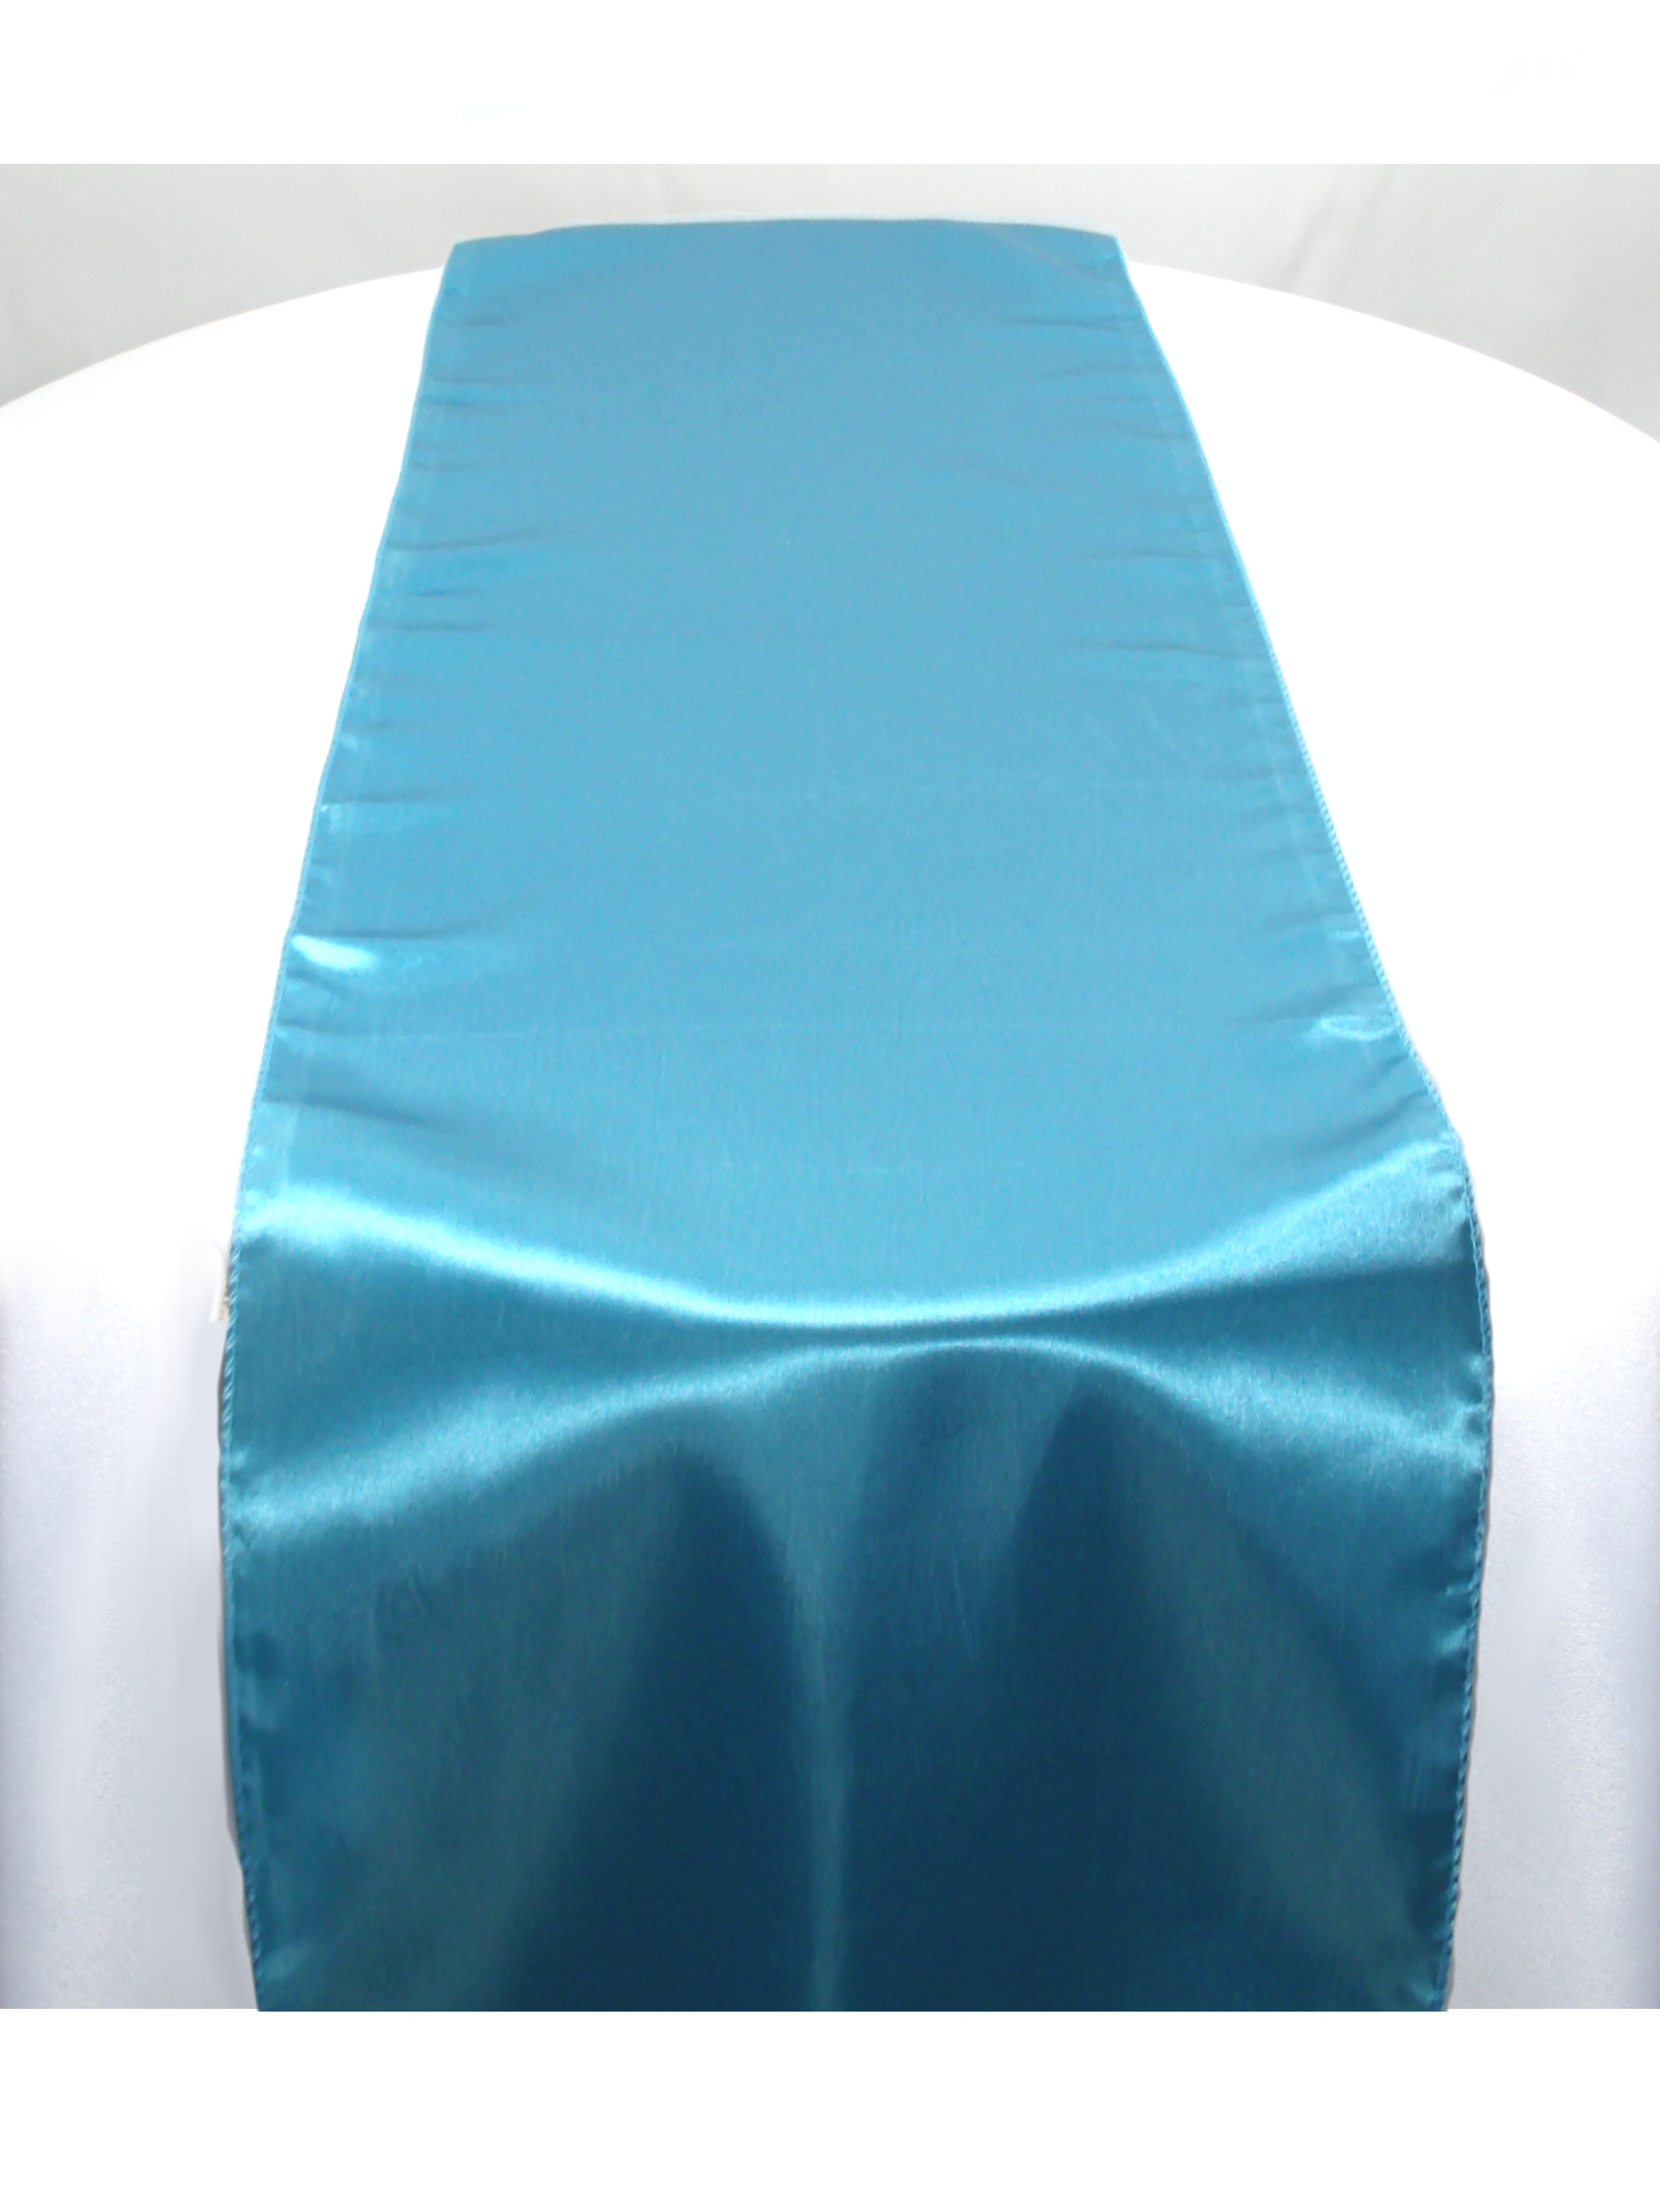 blue table runners for baby shower